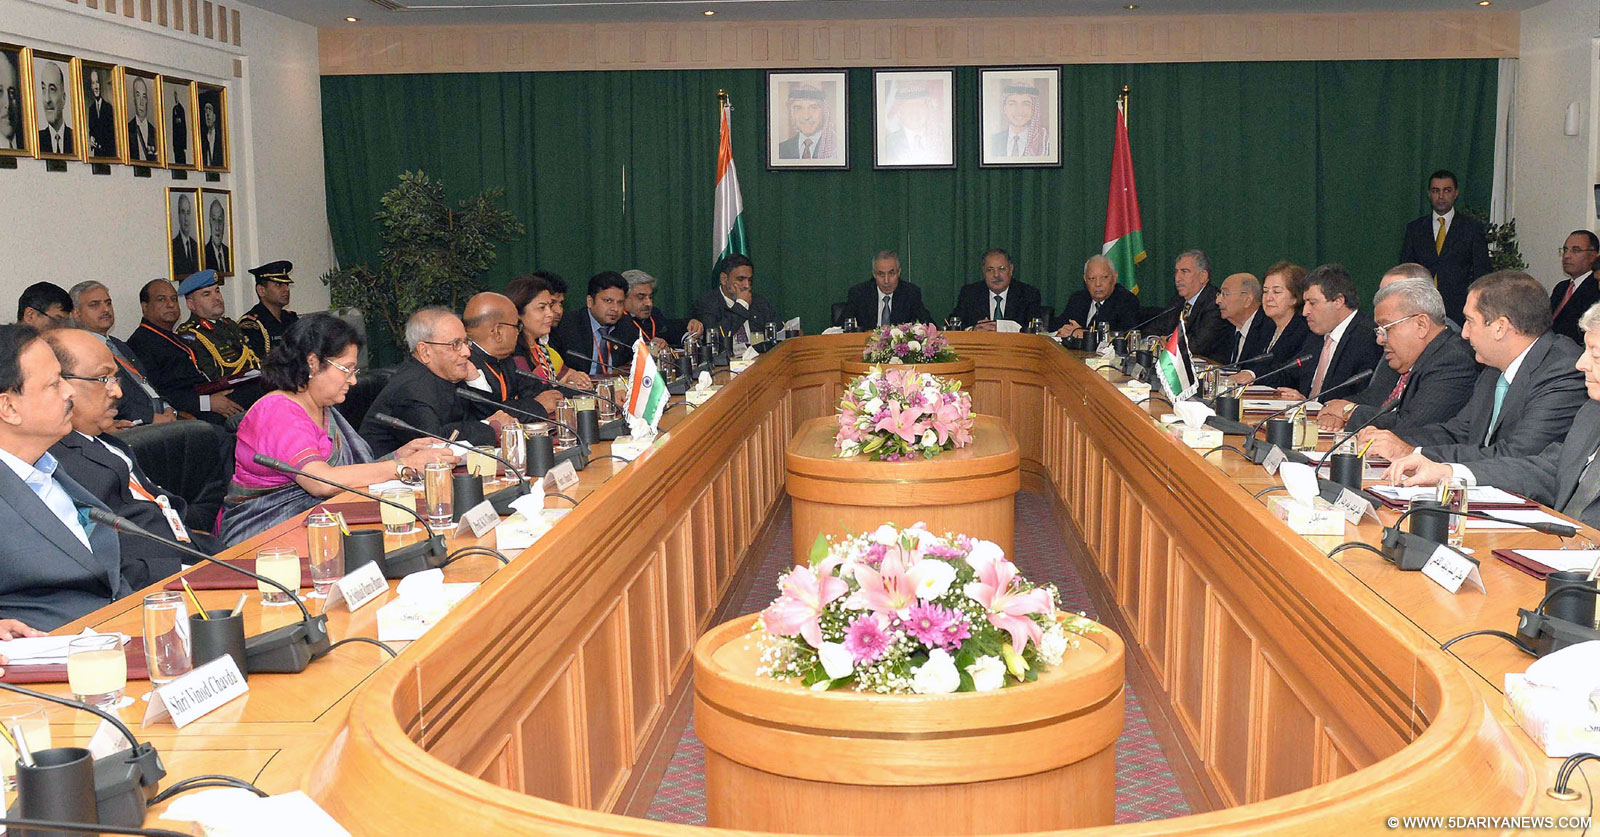 The President, Shri Pranab Mukherjee meeting with the President of Senate, Dr. Abdur-Raúf Rawabdeh and Members of the Foreign Relations Committee at Parliament Building, in Amman, Jordan